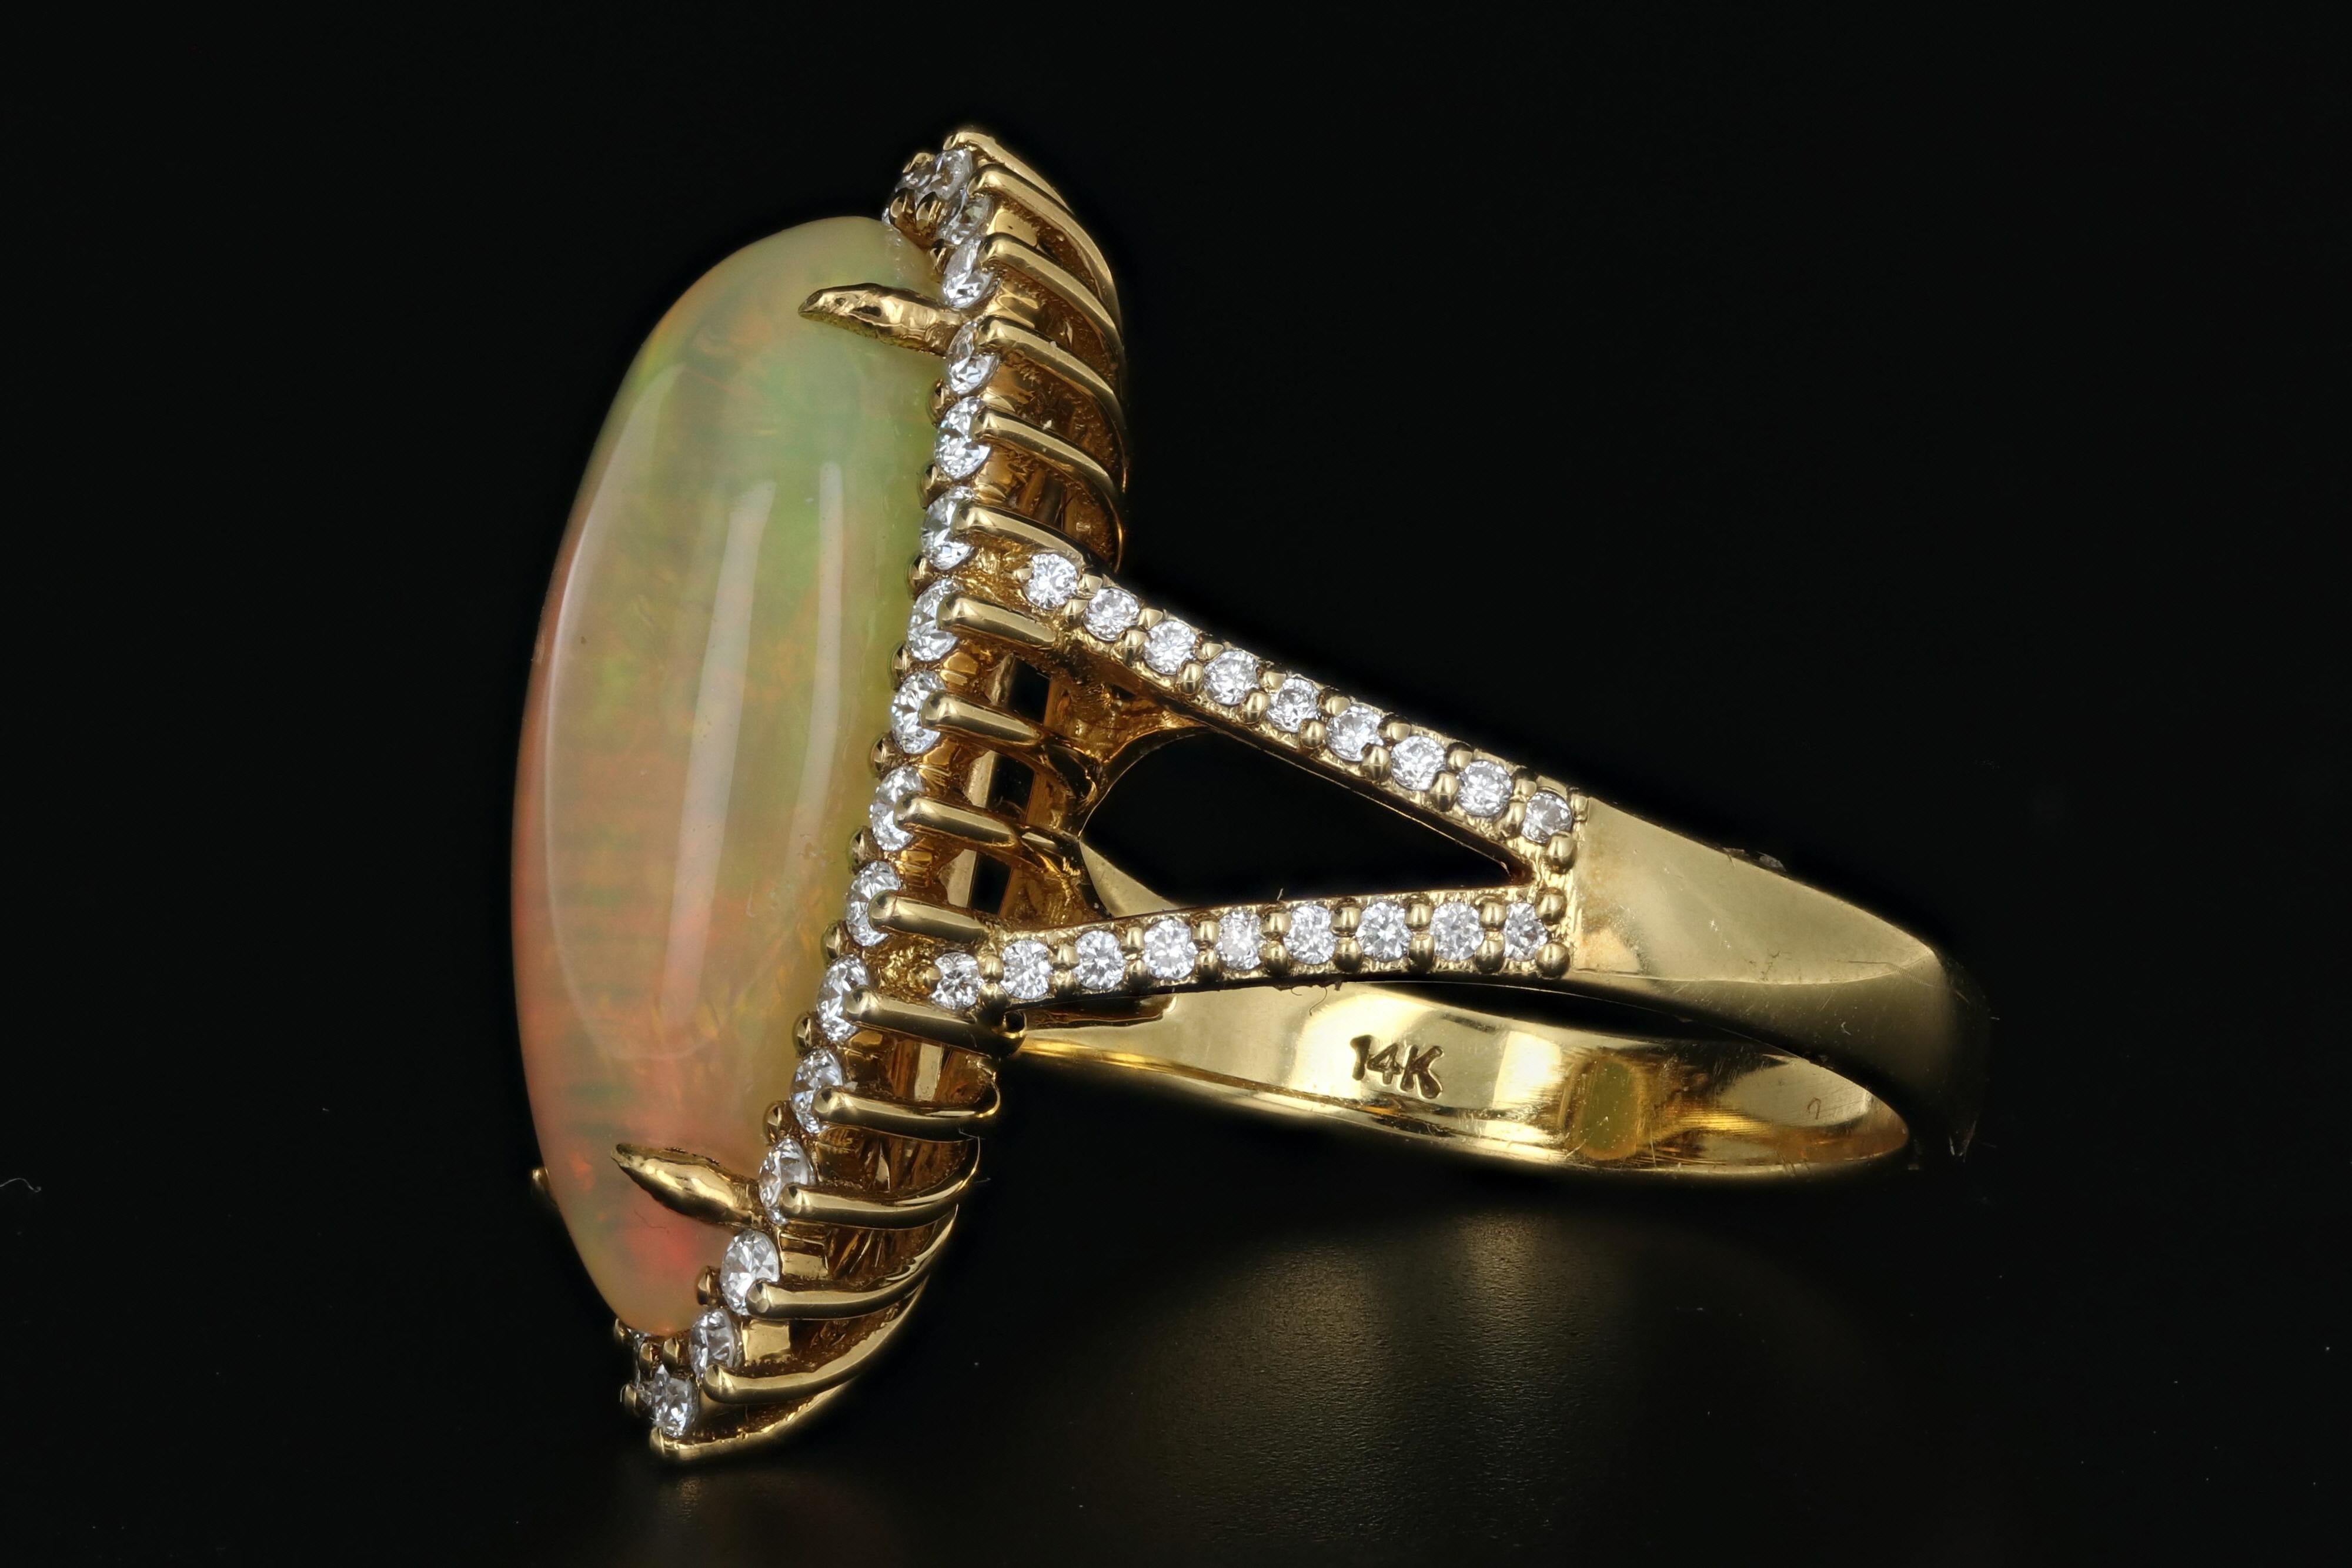 Era: Modern

Hallmarks: 14K

Composition: 14K Yellow Gold

Primary Stone: Ethiopian Opal

Stone Carat: Approximately 8.5 carats

Shape: Tapered Opal Cabochon

Accent Stone: Diamonds

Color/Clarity: G/H - VS1/2

Total Diamond Weight: Approximately